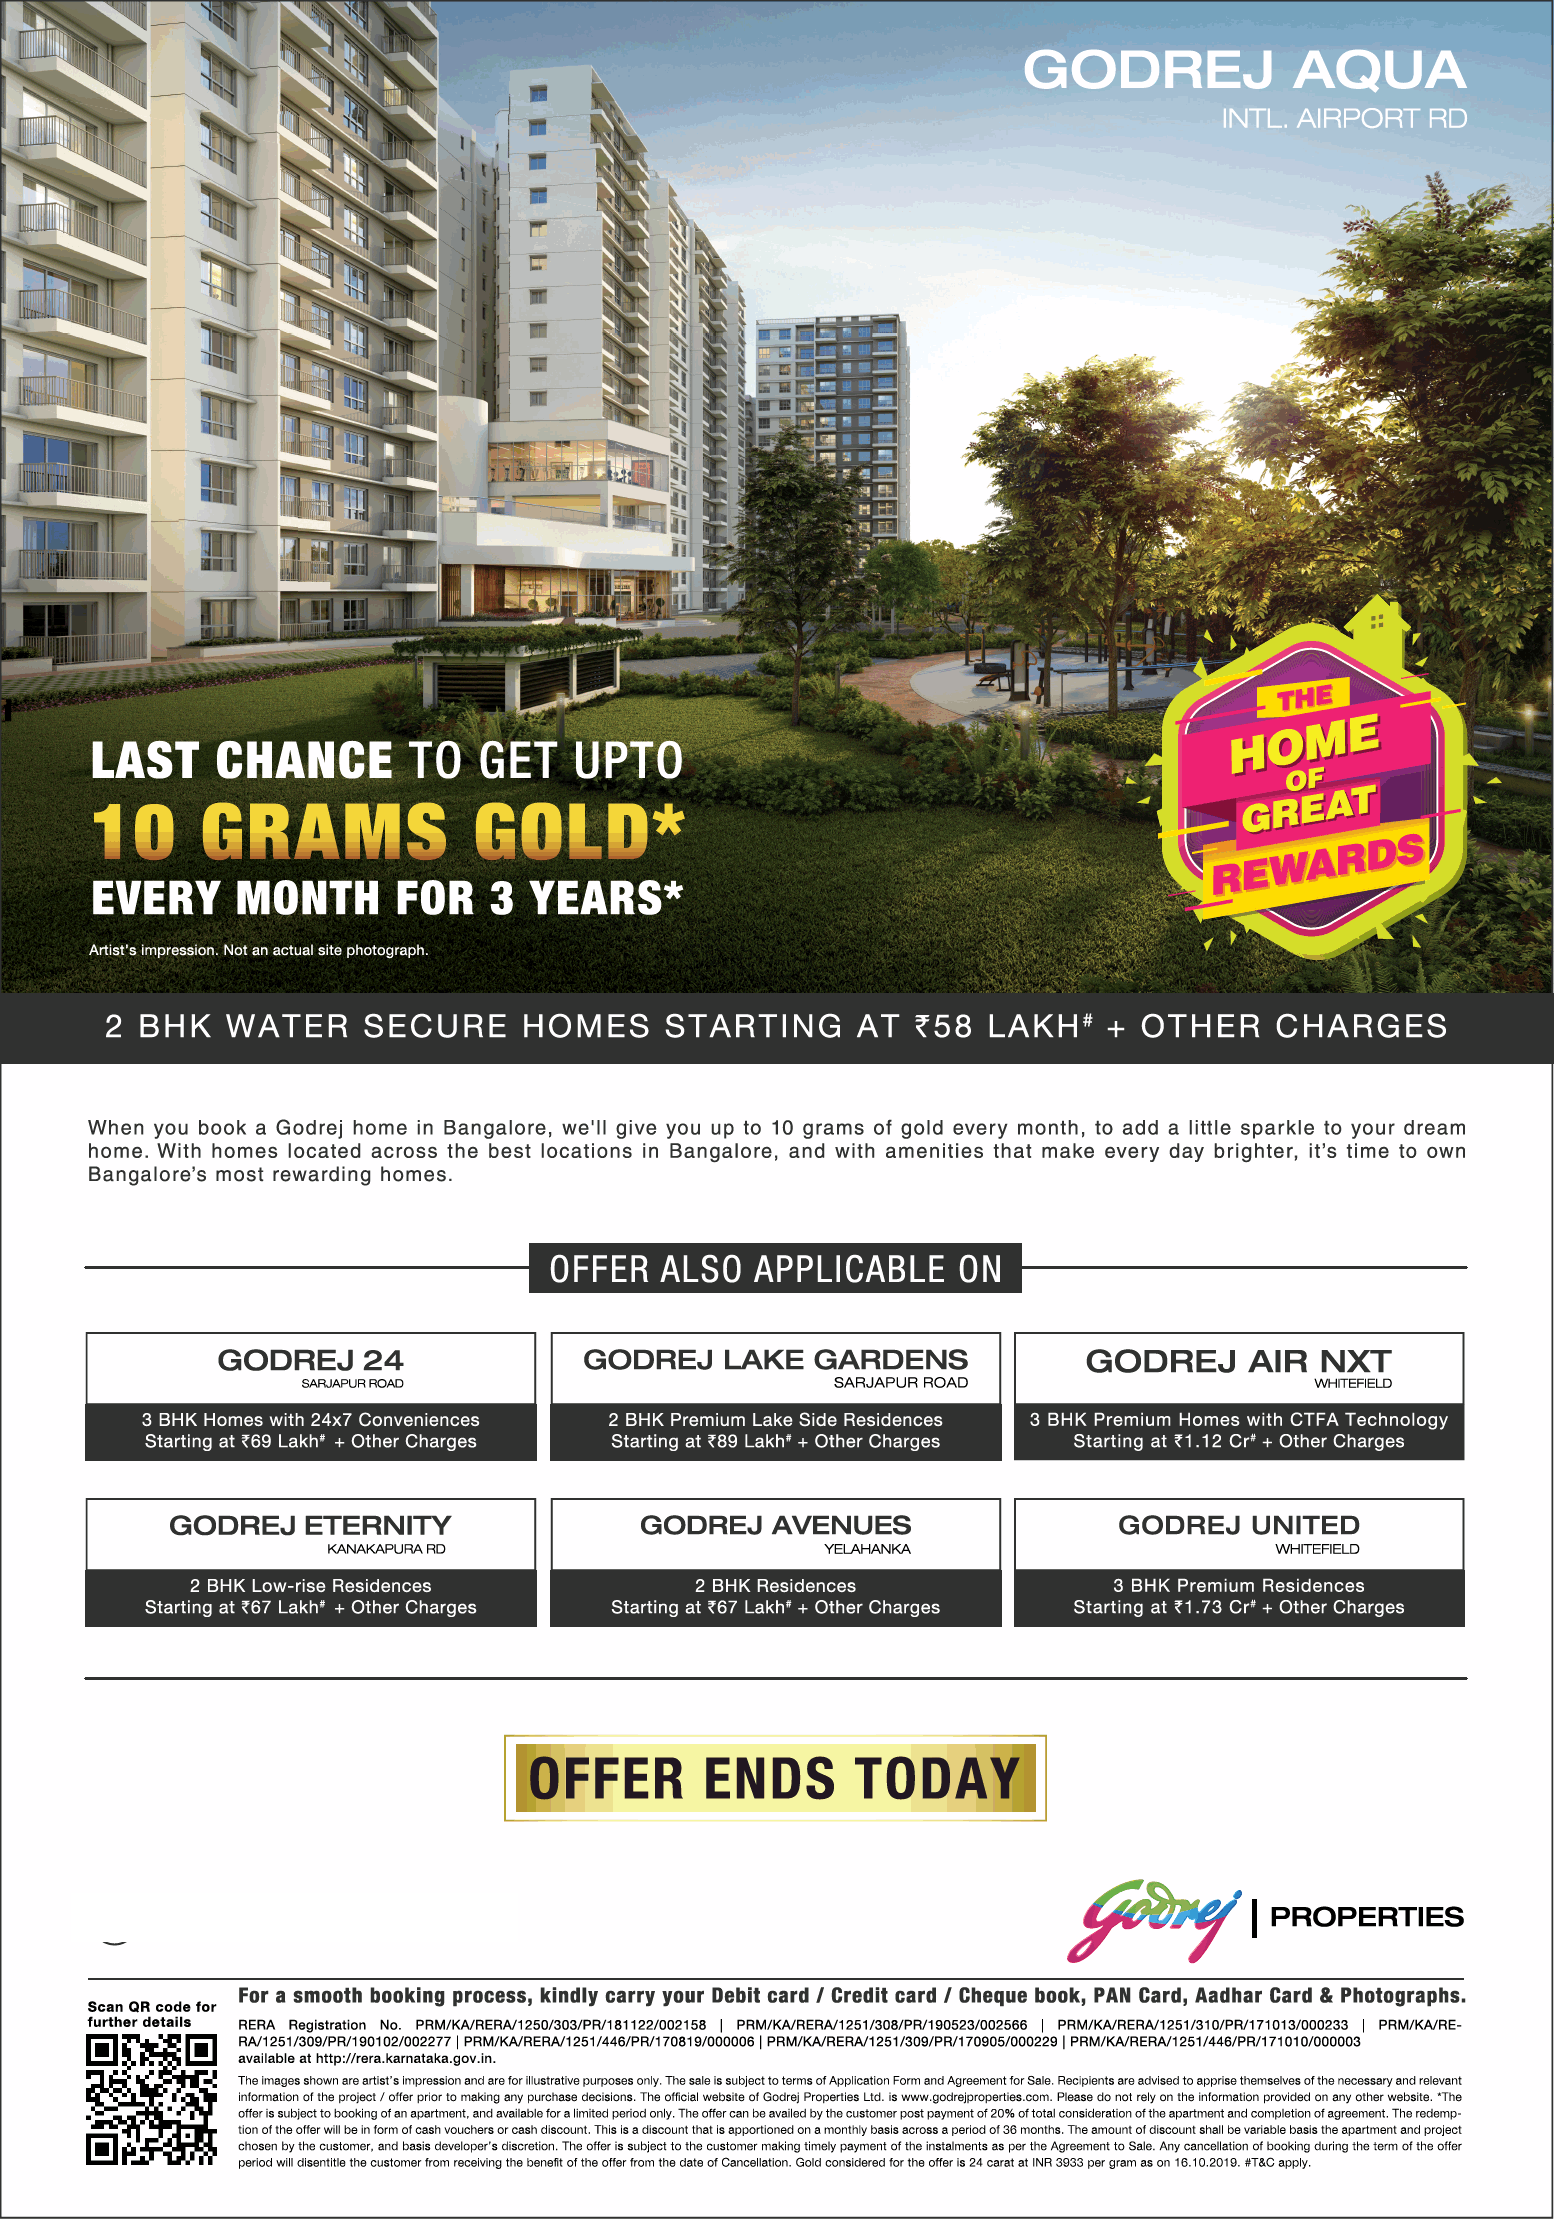 Last chance to get upto 10 grams gold every month for 3 years at Godrej Properties Update